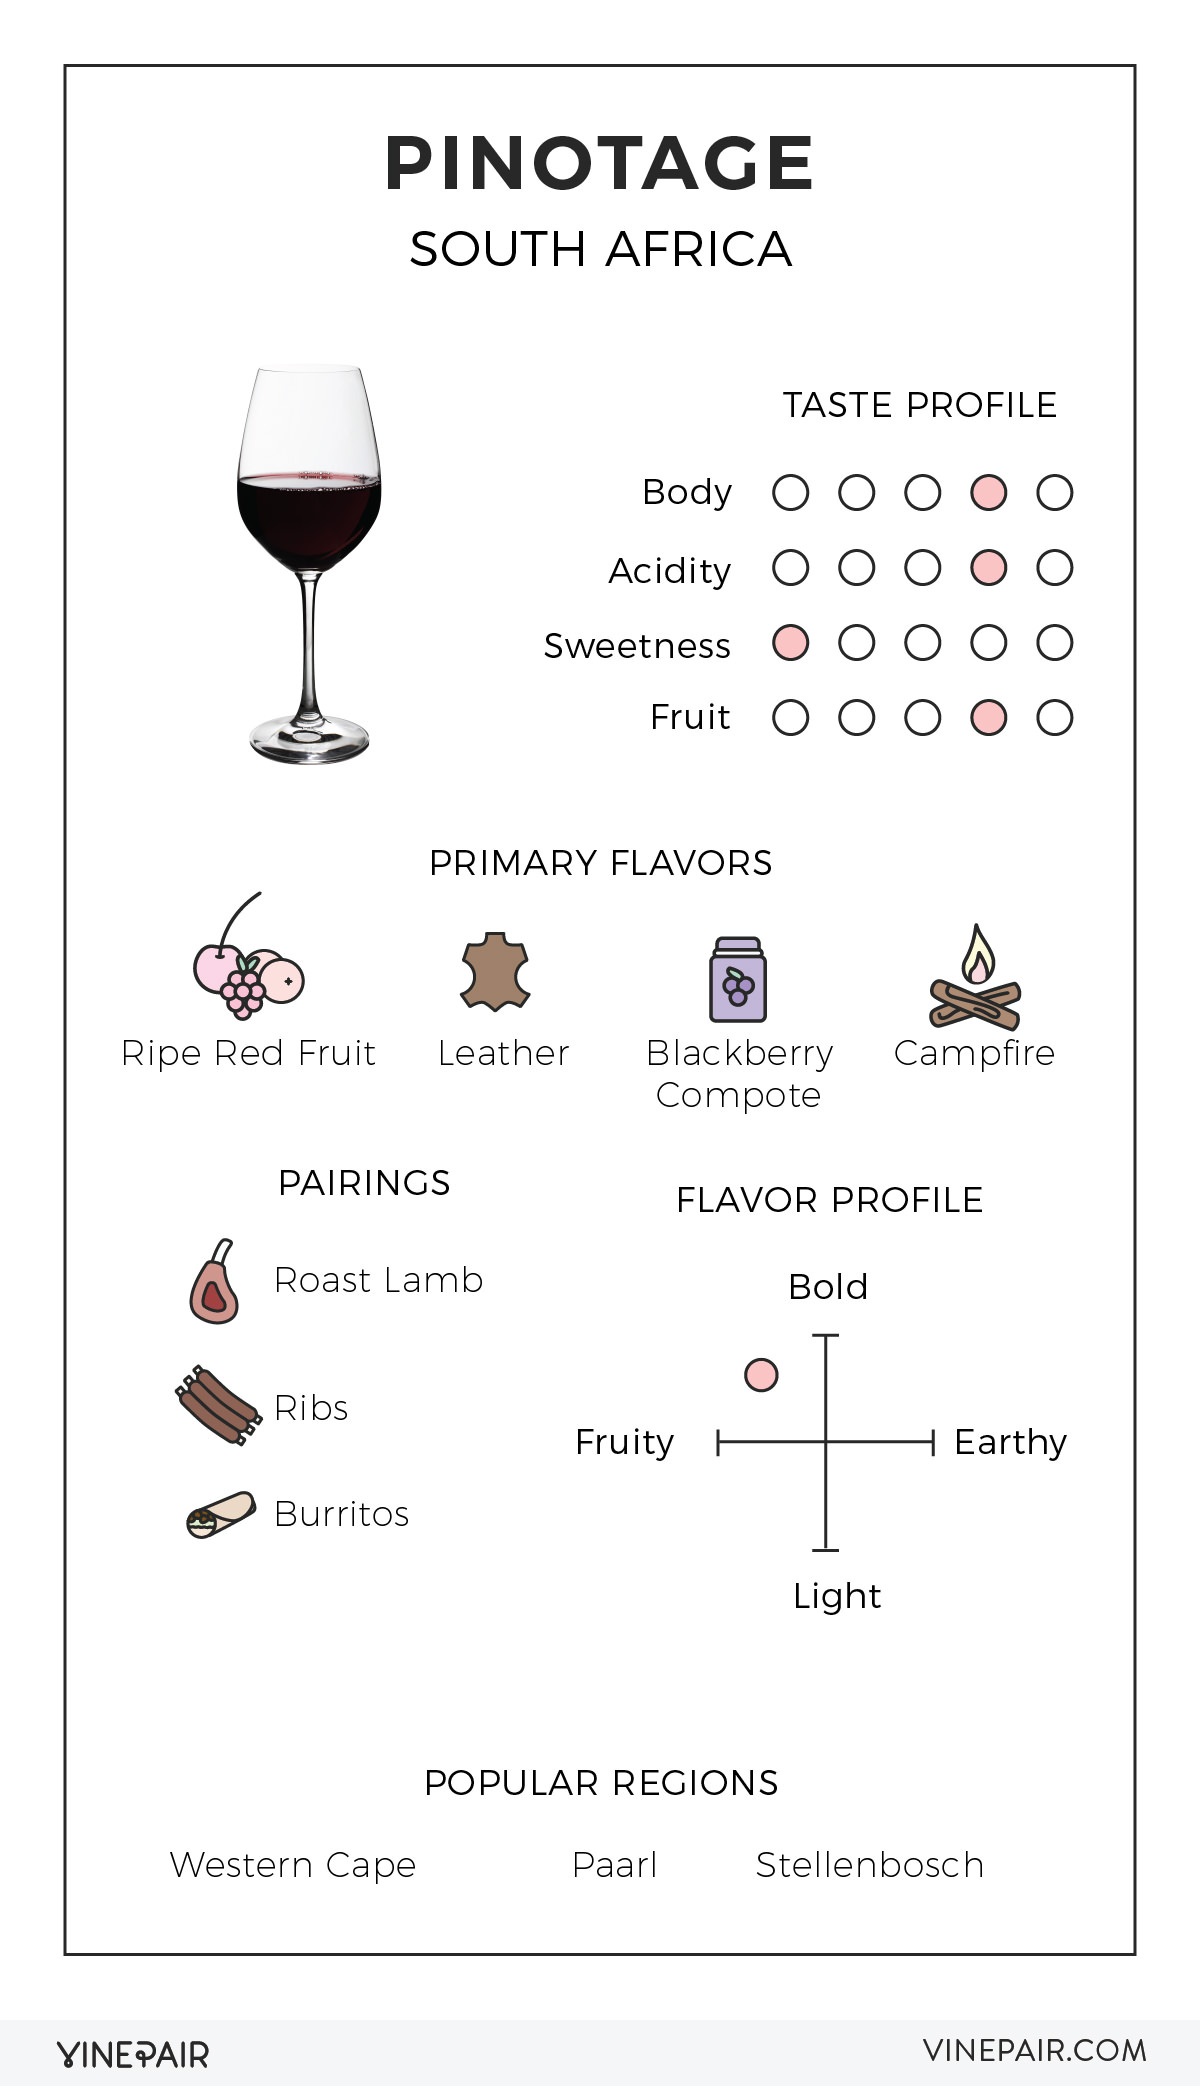 An Illustrated Guide to Pinotage